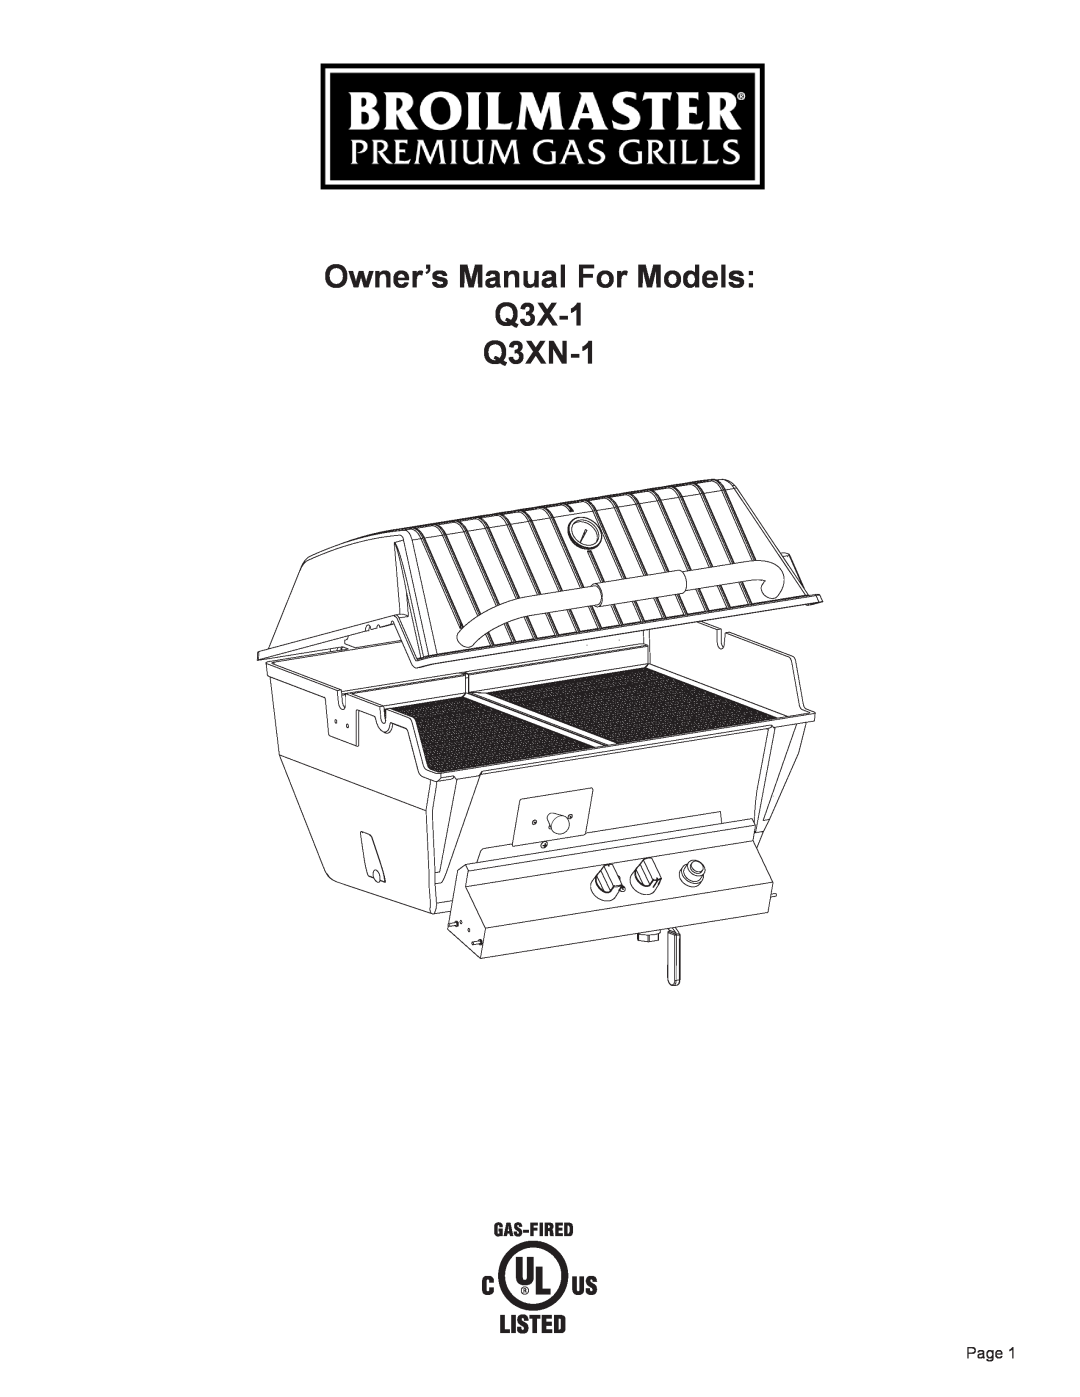 Broilmaster owner manual Owner’s Manual For Models Q3X-1 Q3XN-1, Gas-Fired 